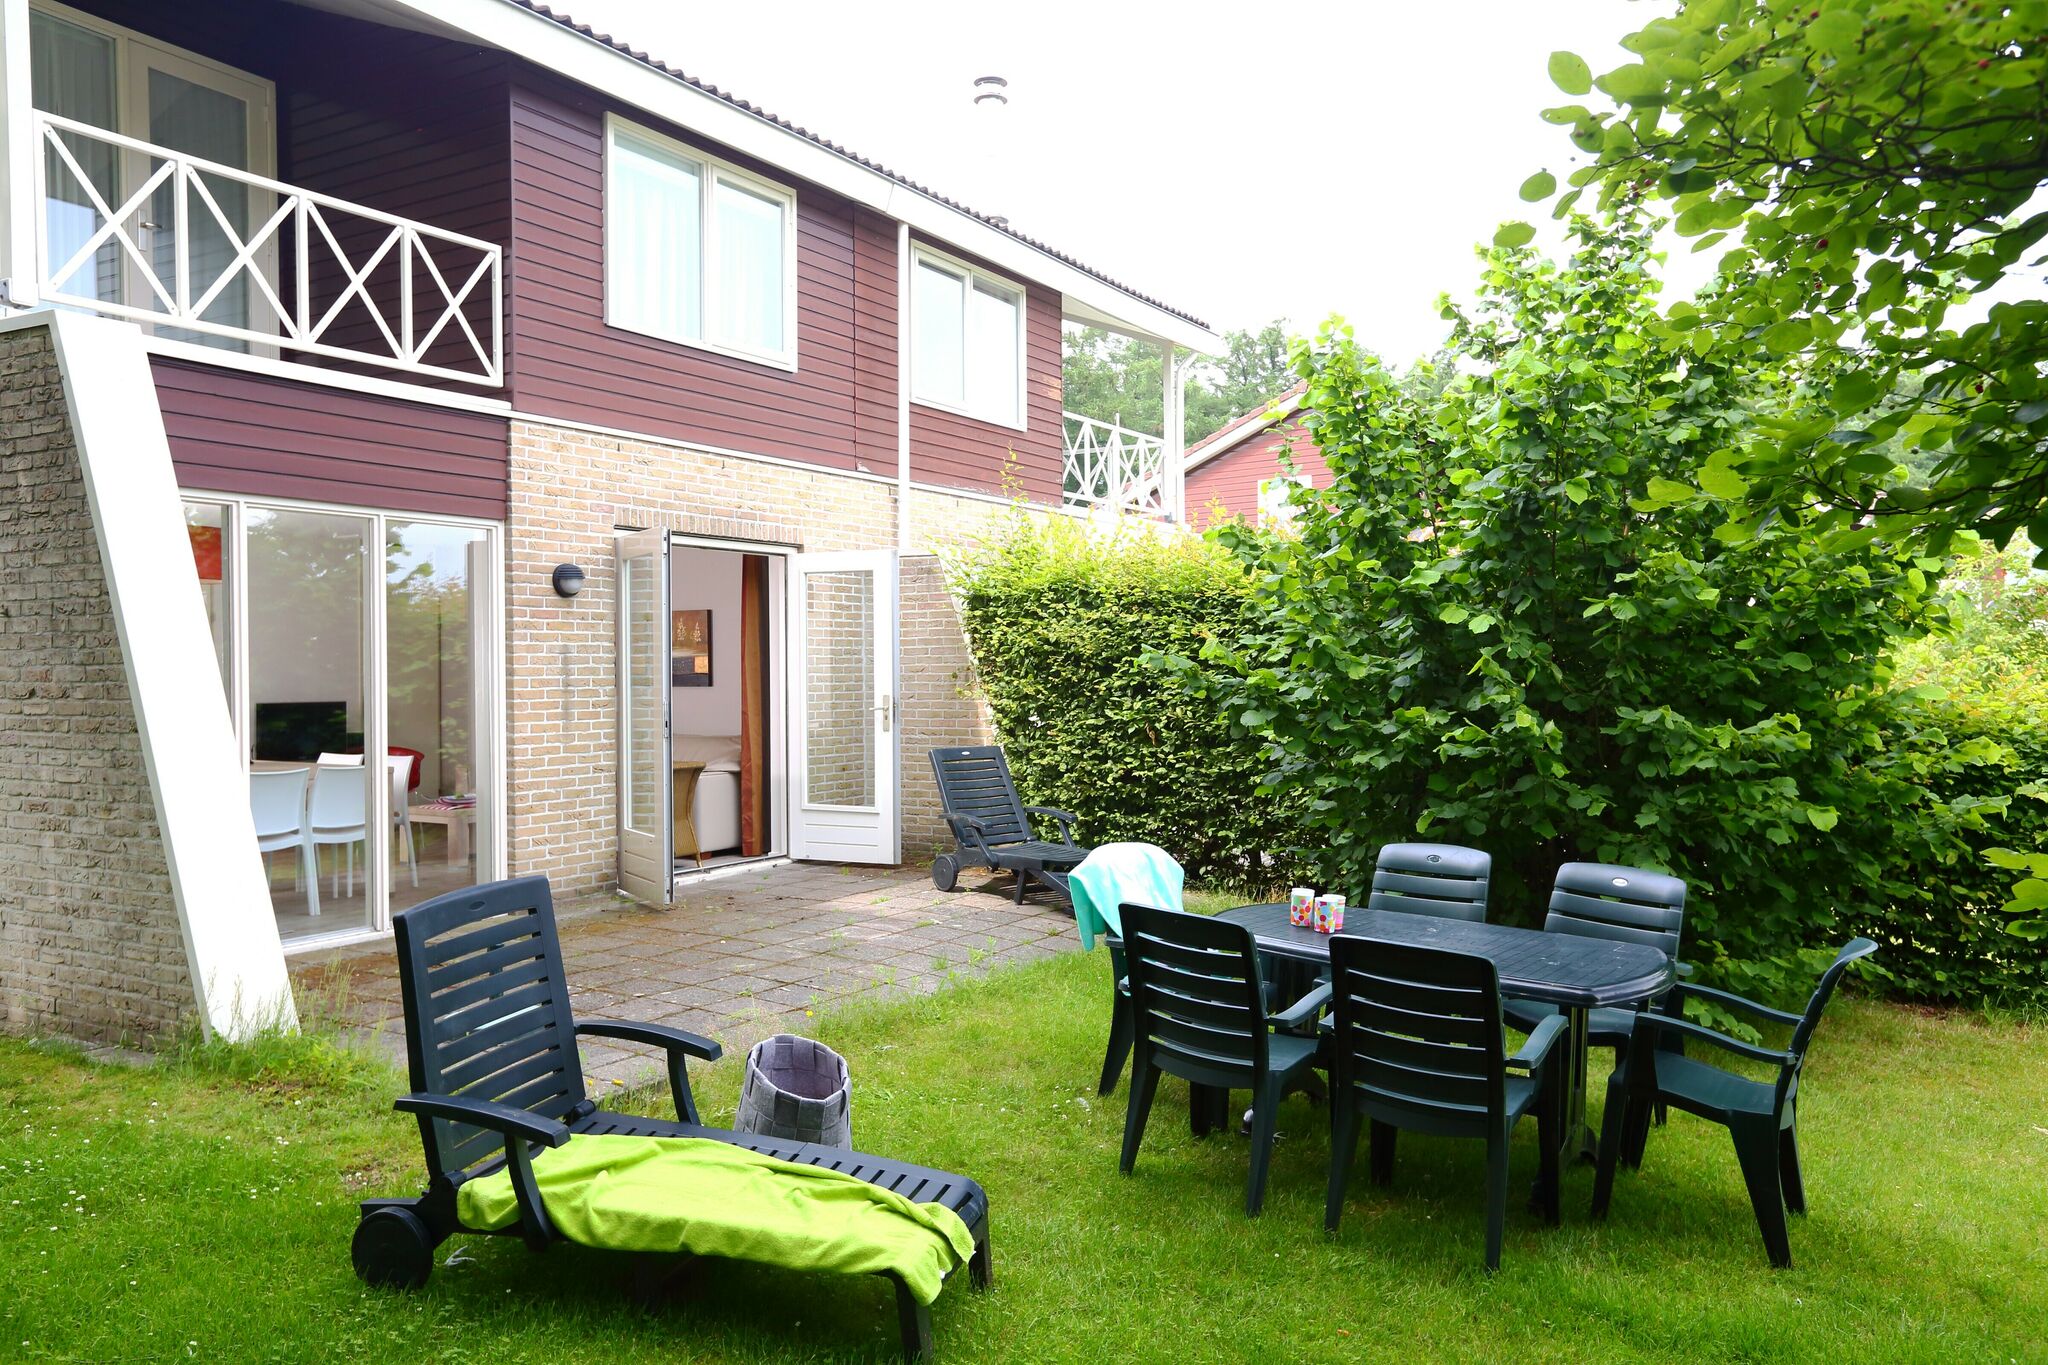 Tidy holiday home with WiFi, located near the Emslandermeer